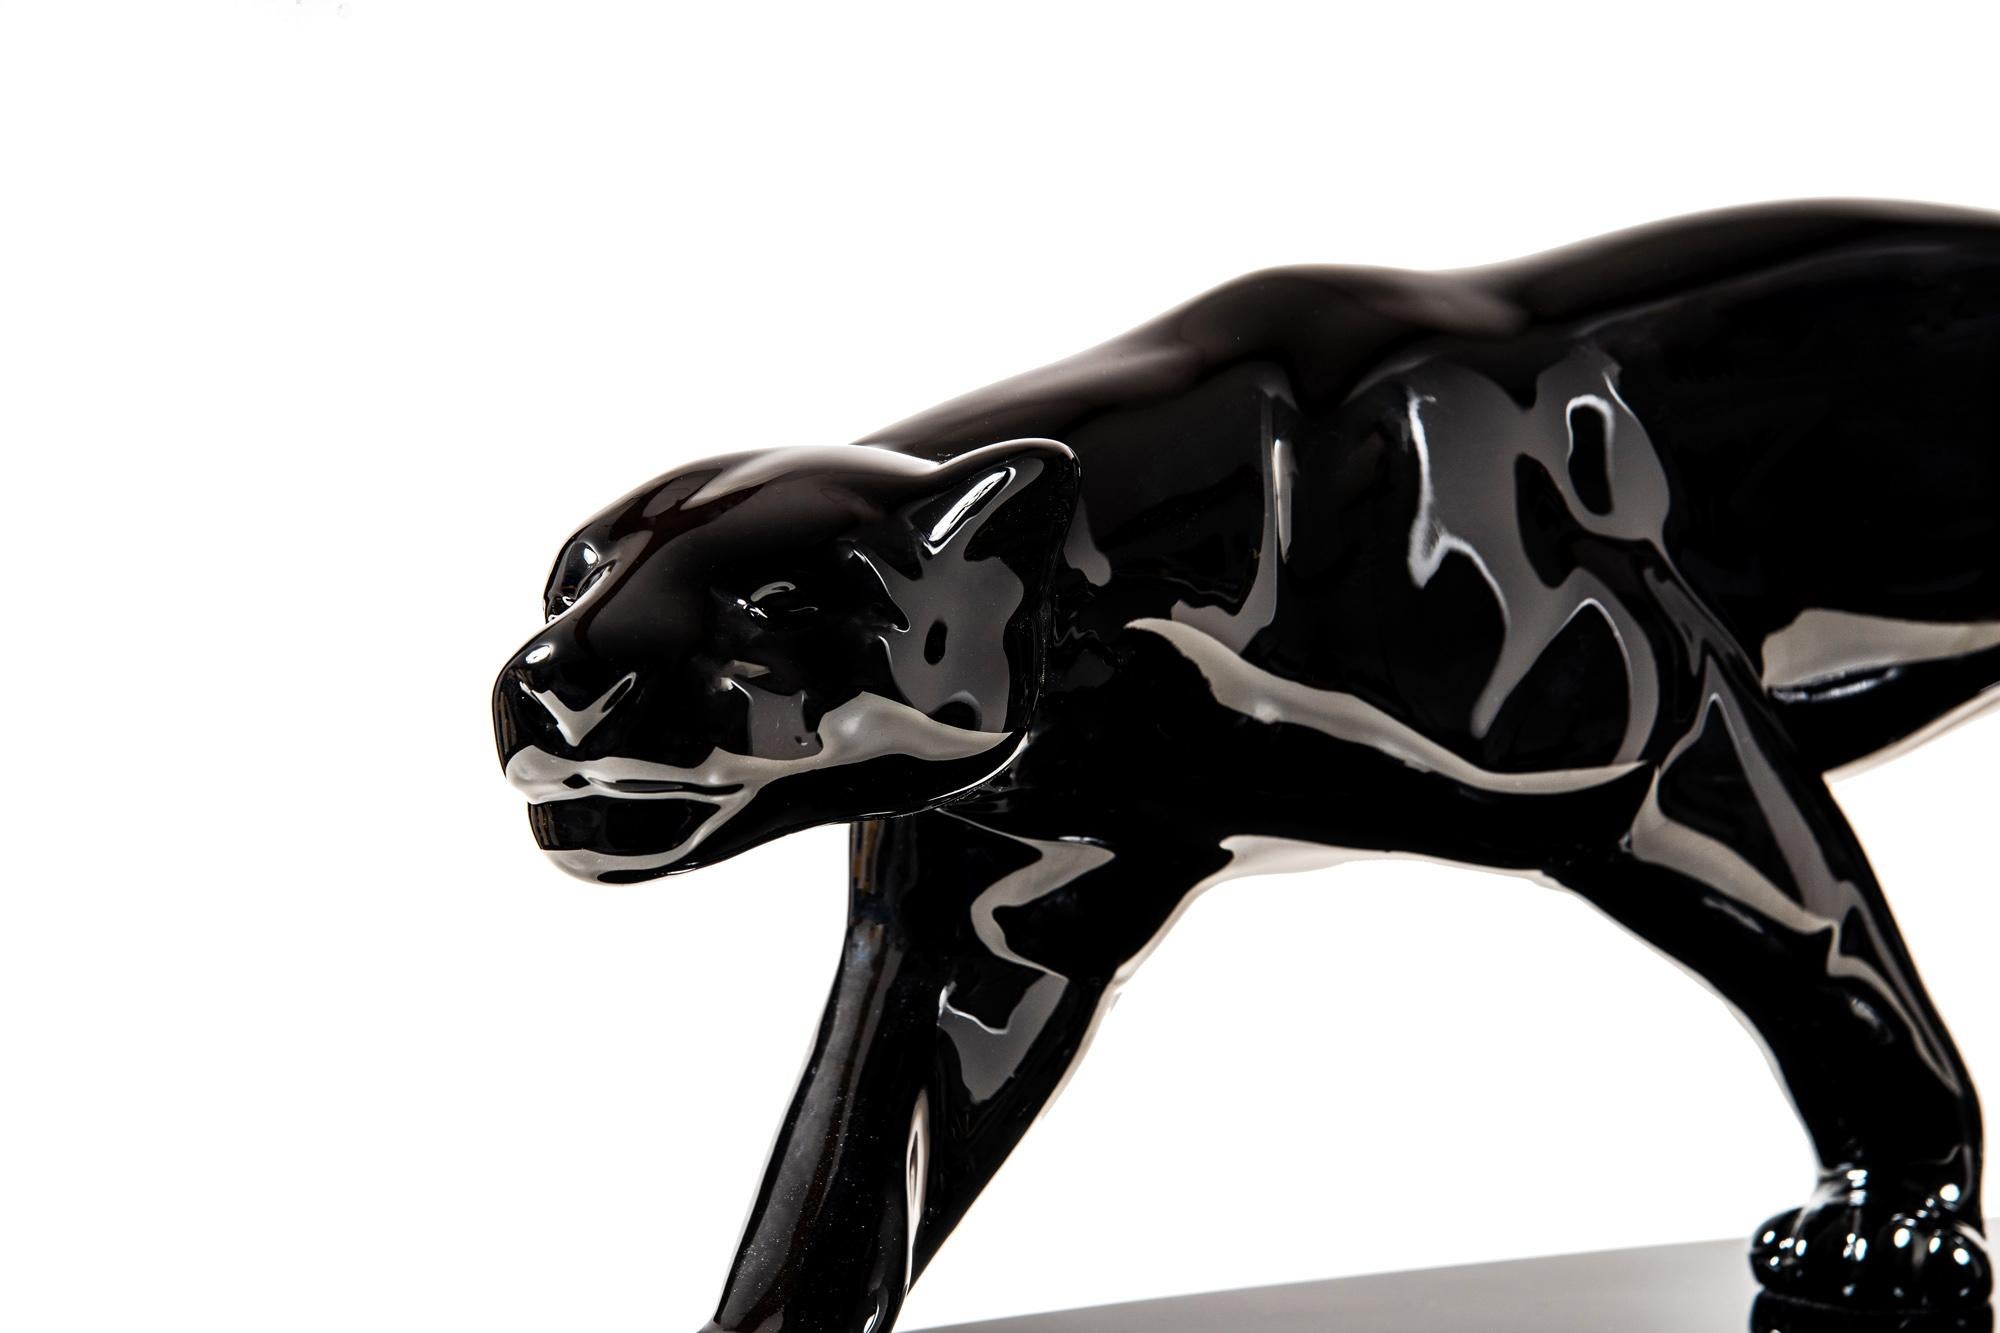 Large original panther sculpture from Paris, circa 1940. In the style of Paul Jouve's Panther drawing.

Ceramic mass, polyester lacquer coated and polished.
Polished (lasercut) stainless steel plate under a lacquered oval wooden base.
Model